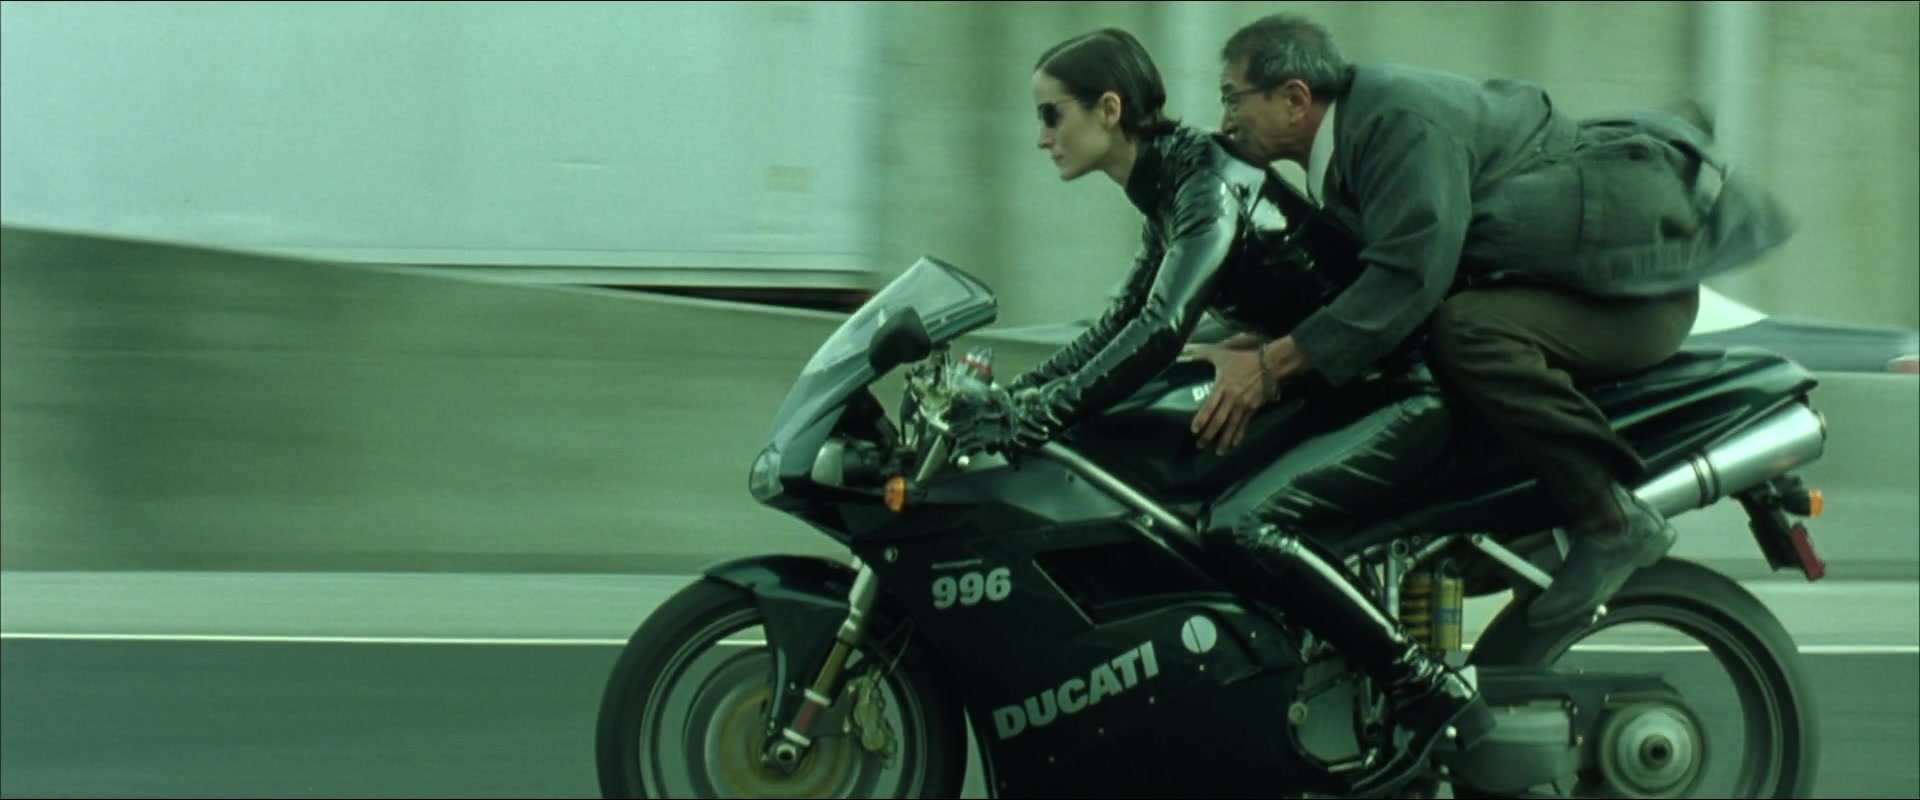 Ducati 996 Motorcycle in The Matrix Reloaded (2003) Movie